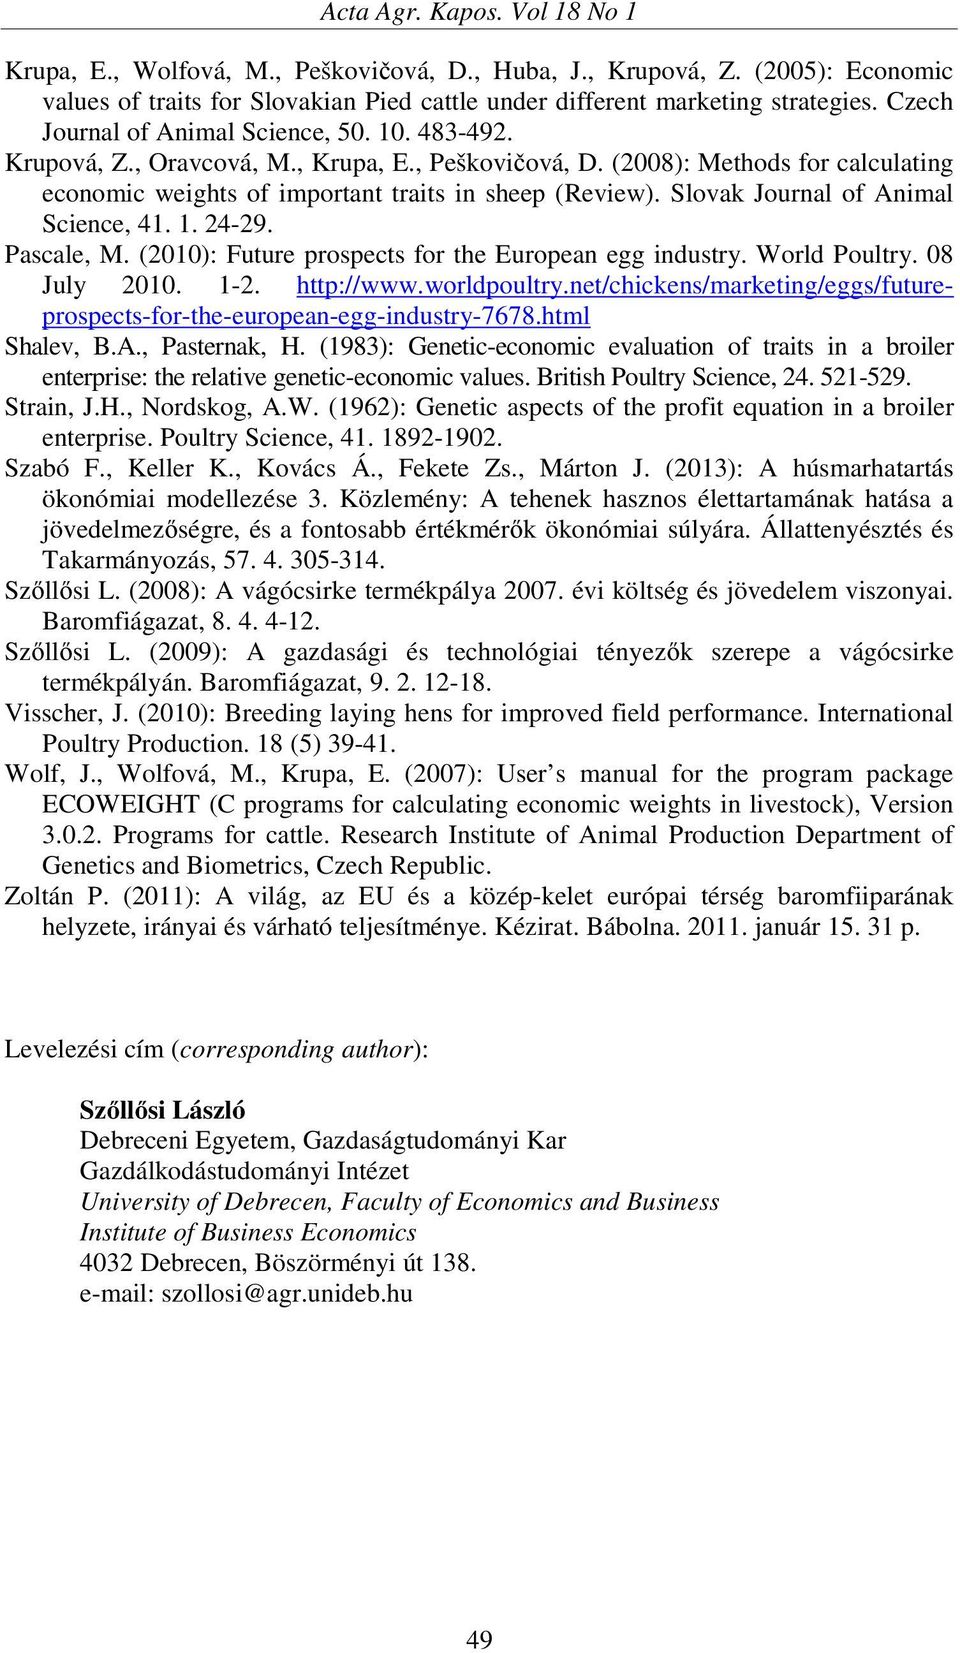 Slovak Journal of Animal Science, 41. 1. 24-29. Pascale, M. (2010): Future prospects for the European egg industry. World Poultry. 08 July 2010. 1-2. http://www.worldpoultry.